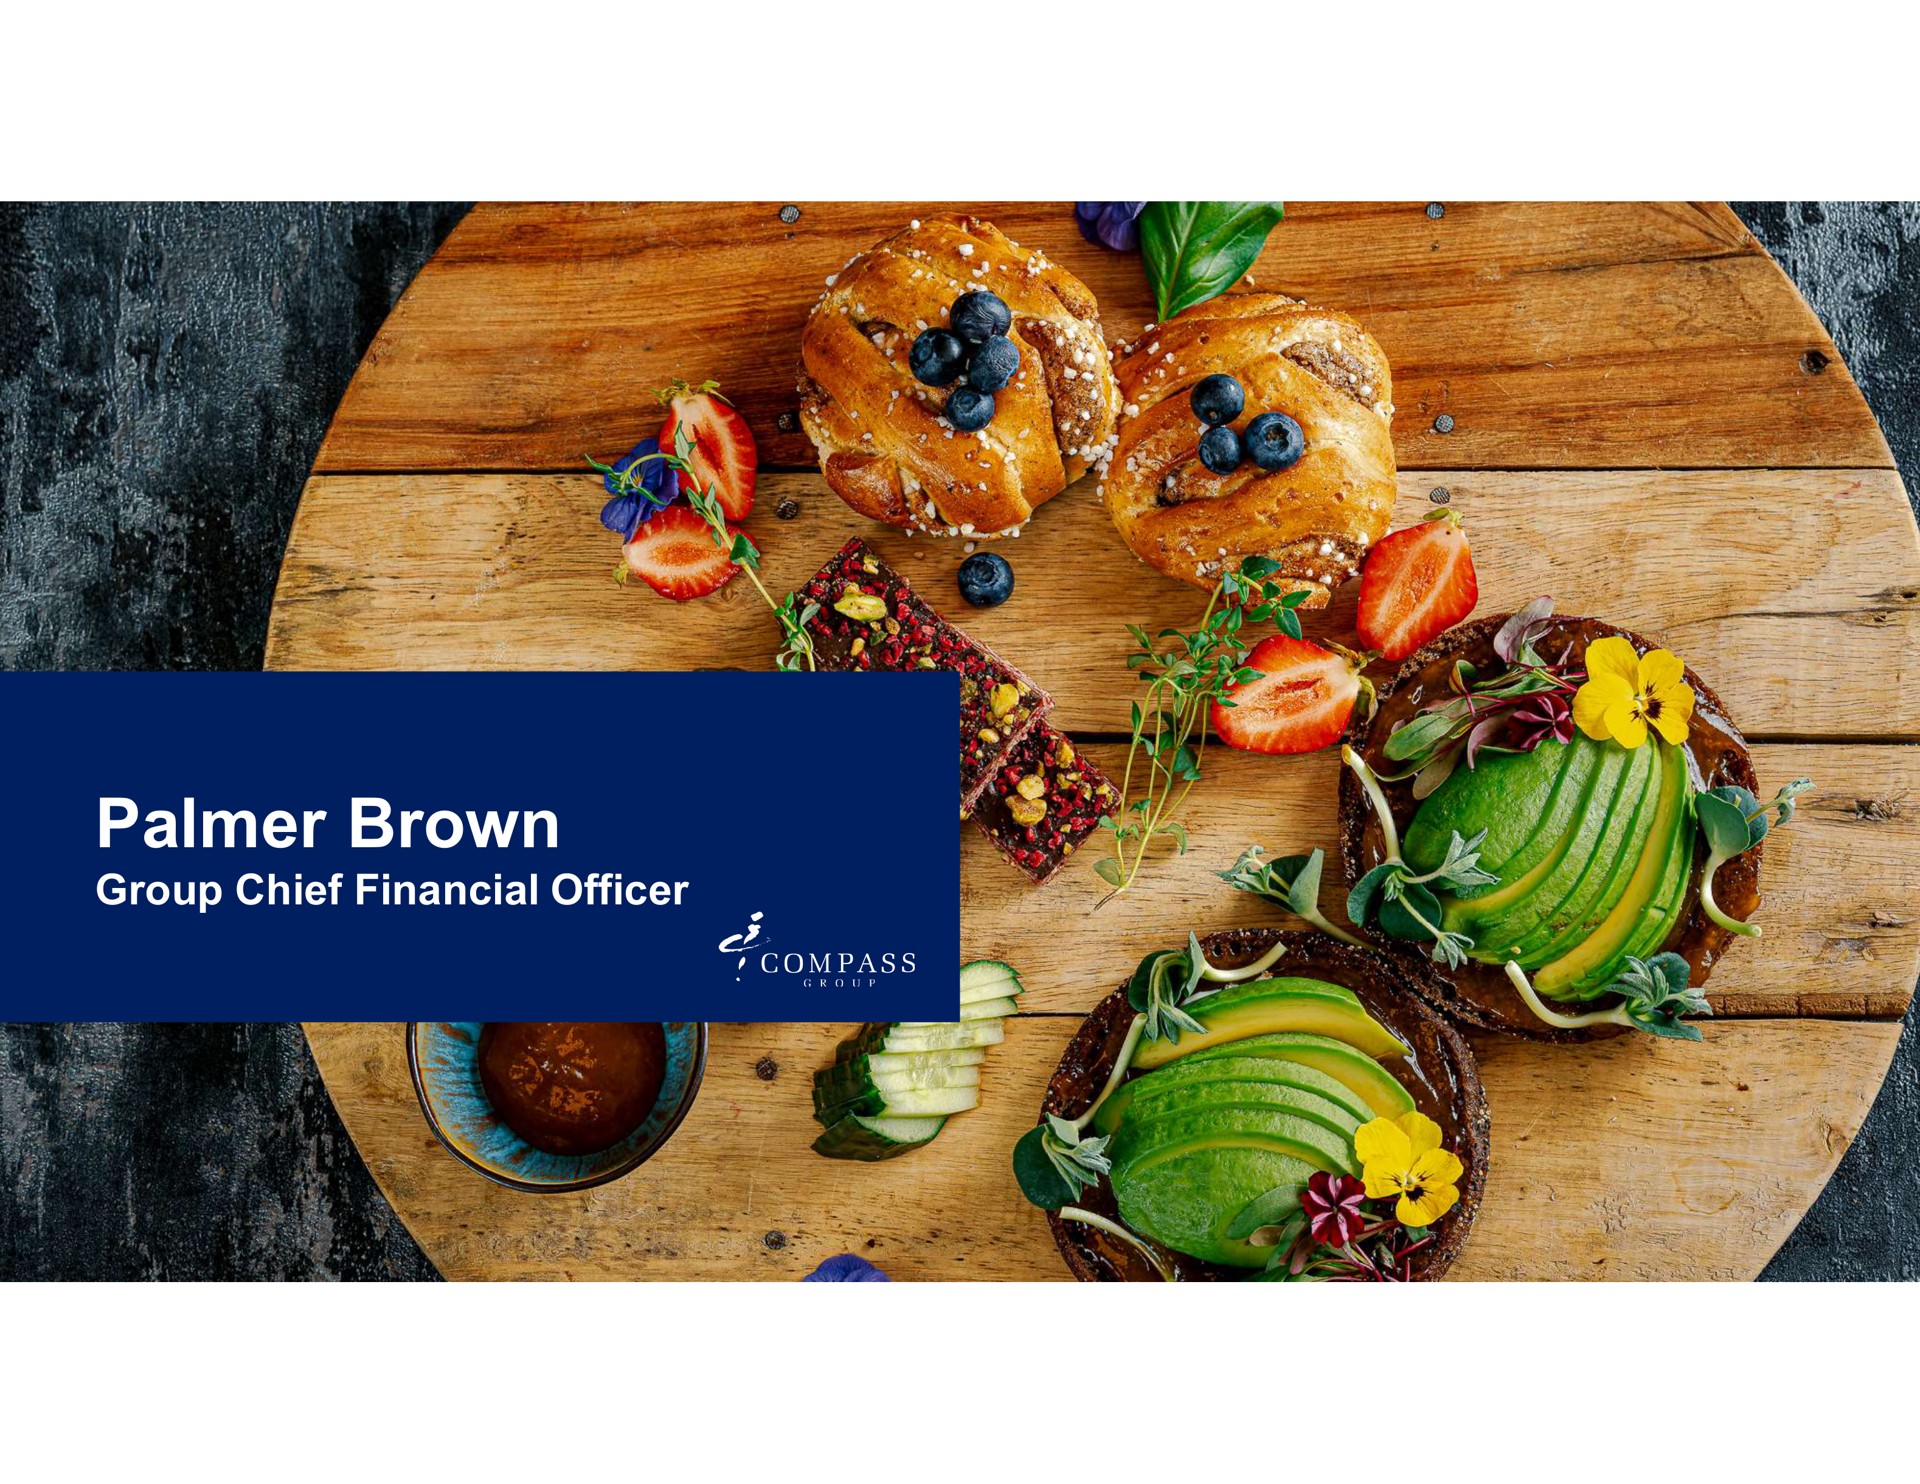 palmer brown | Compass Group